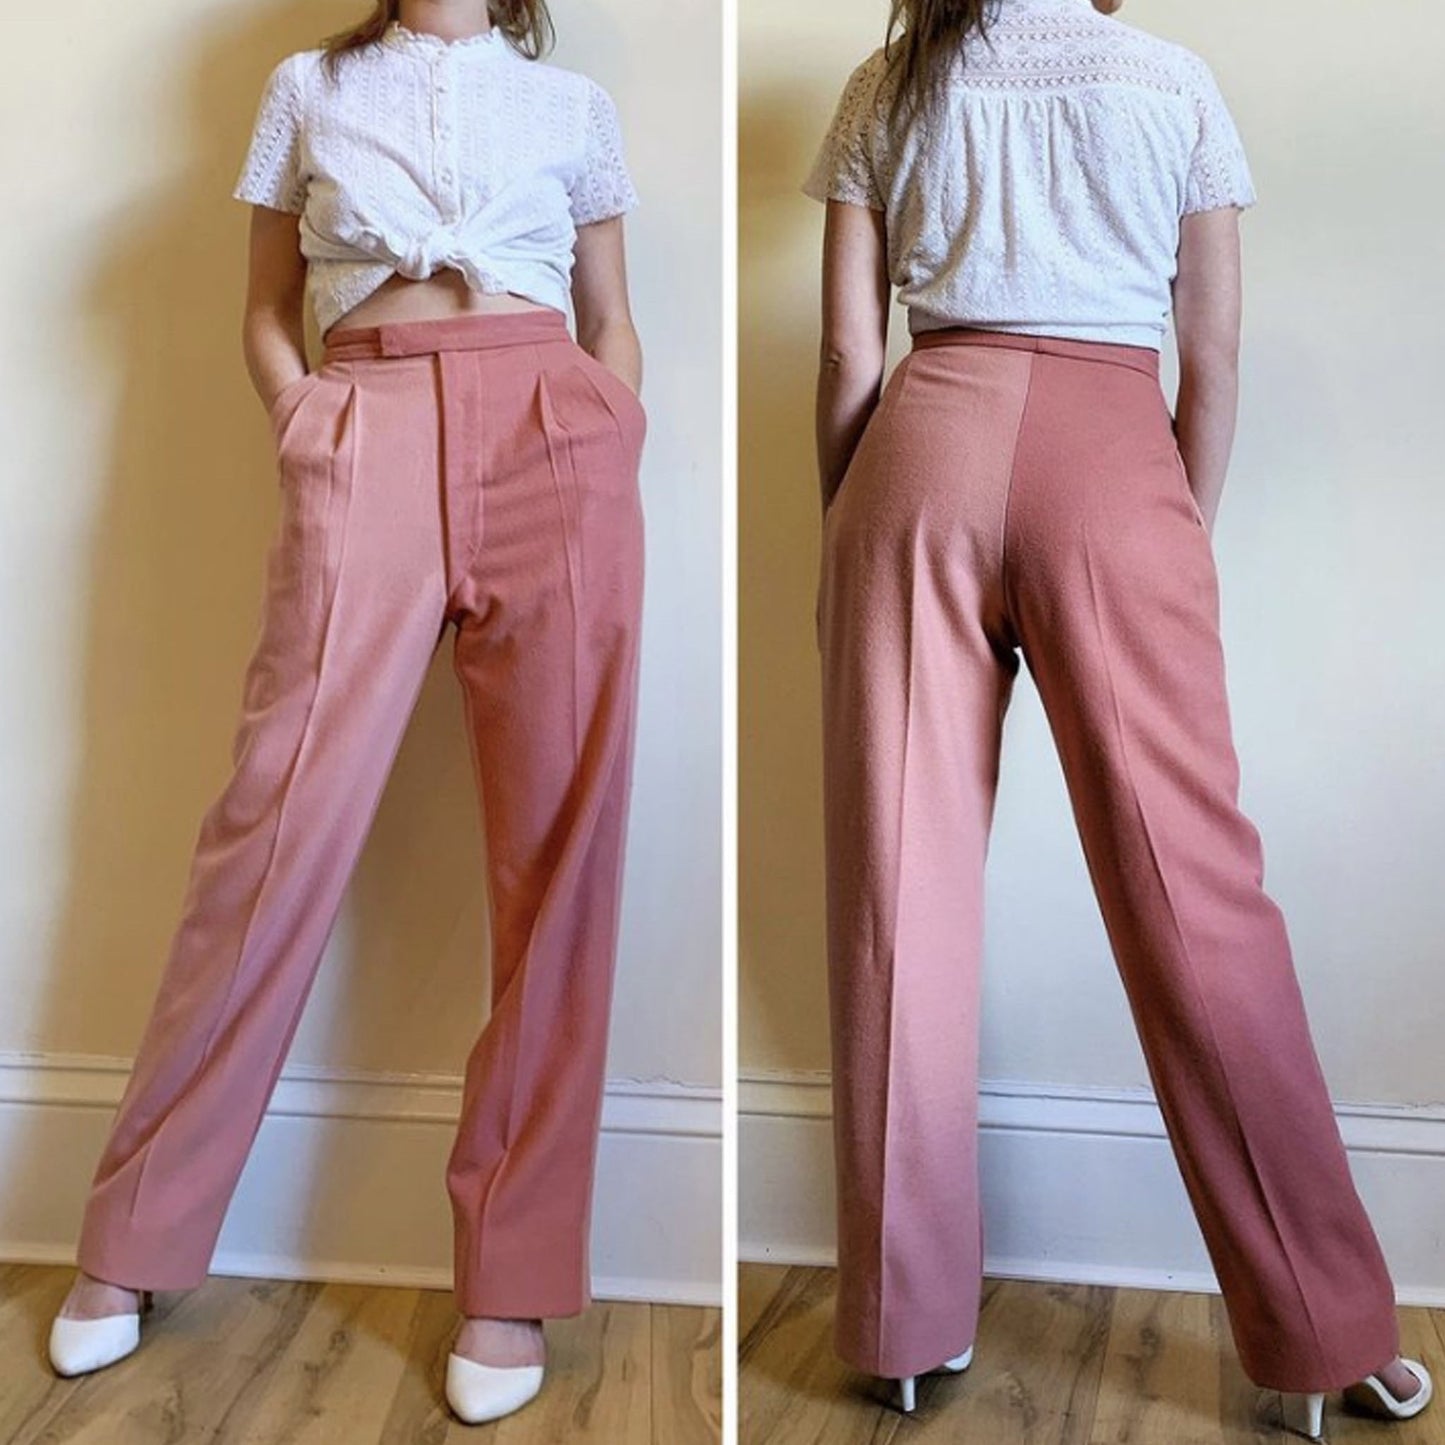 Woman wering two toned slacks made from man's 1950s trouser pattern. Front and back views.